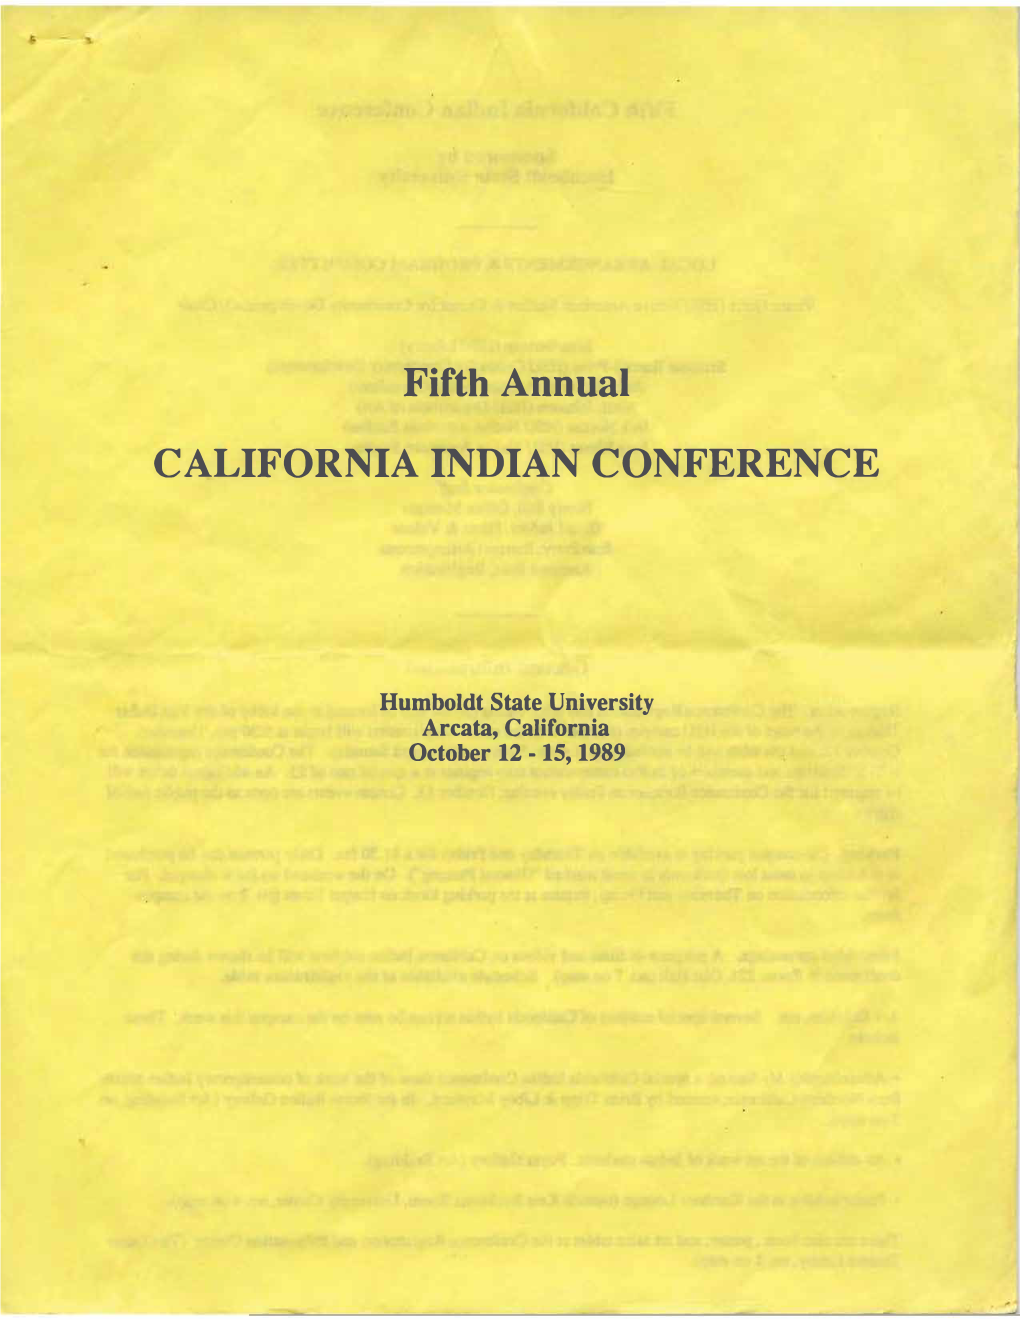 Fifth Annual CALIFORNIA INDIAN CONFERENCE